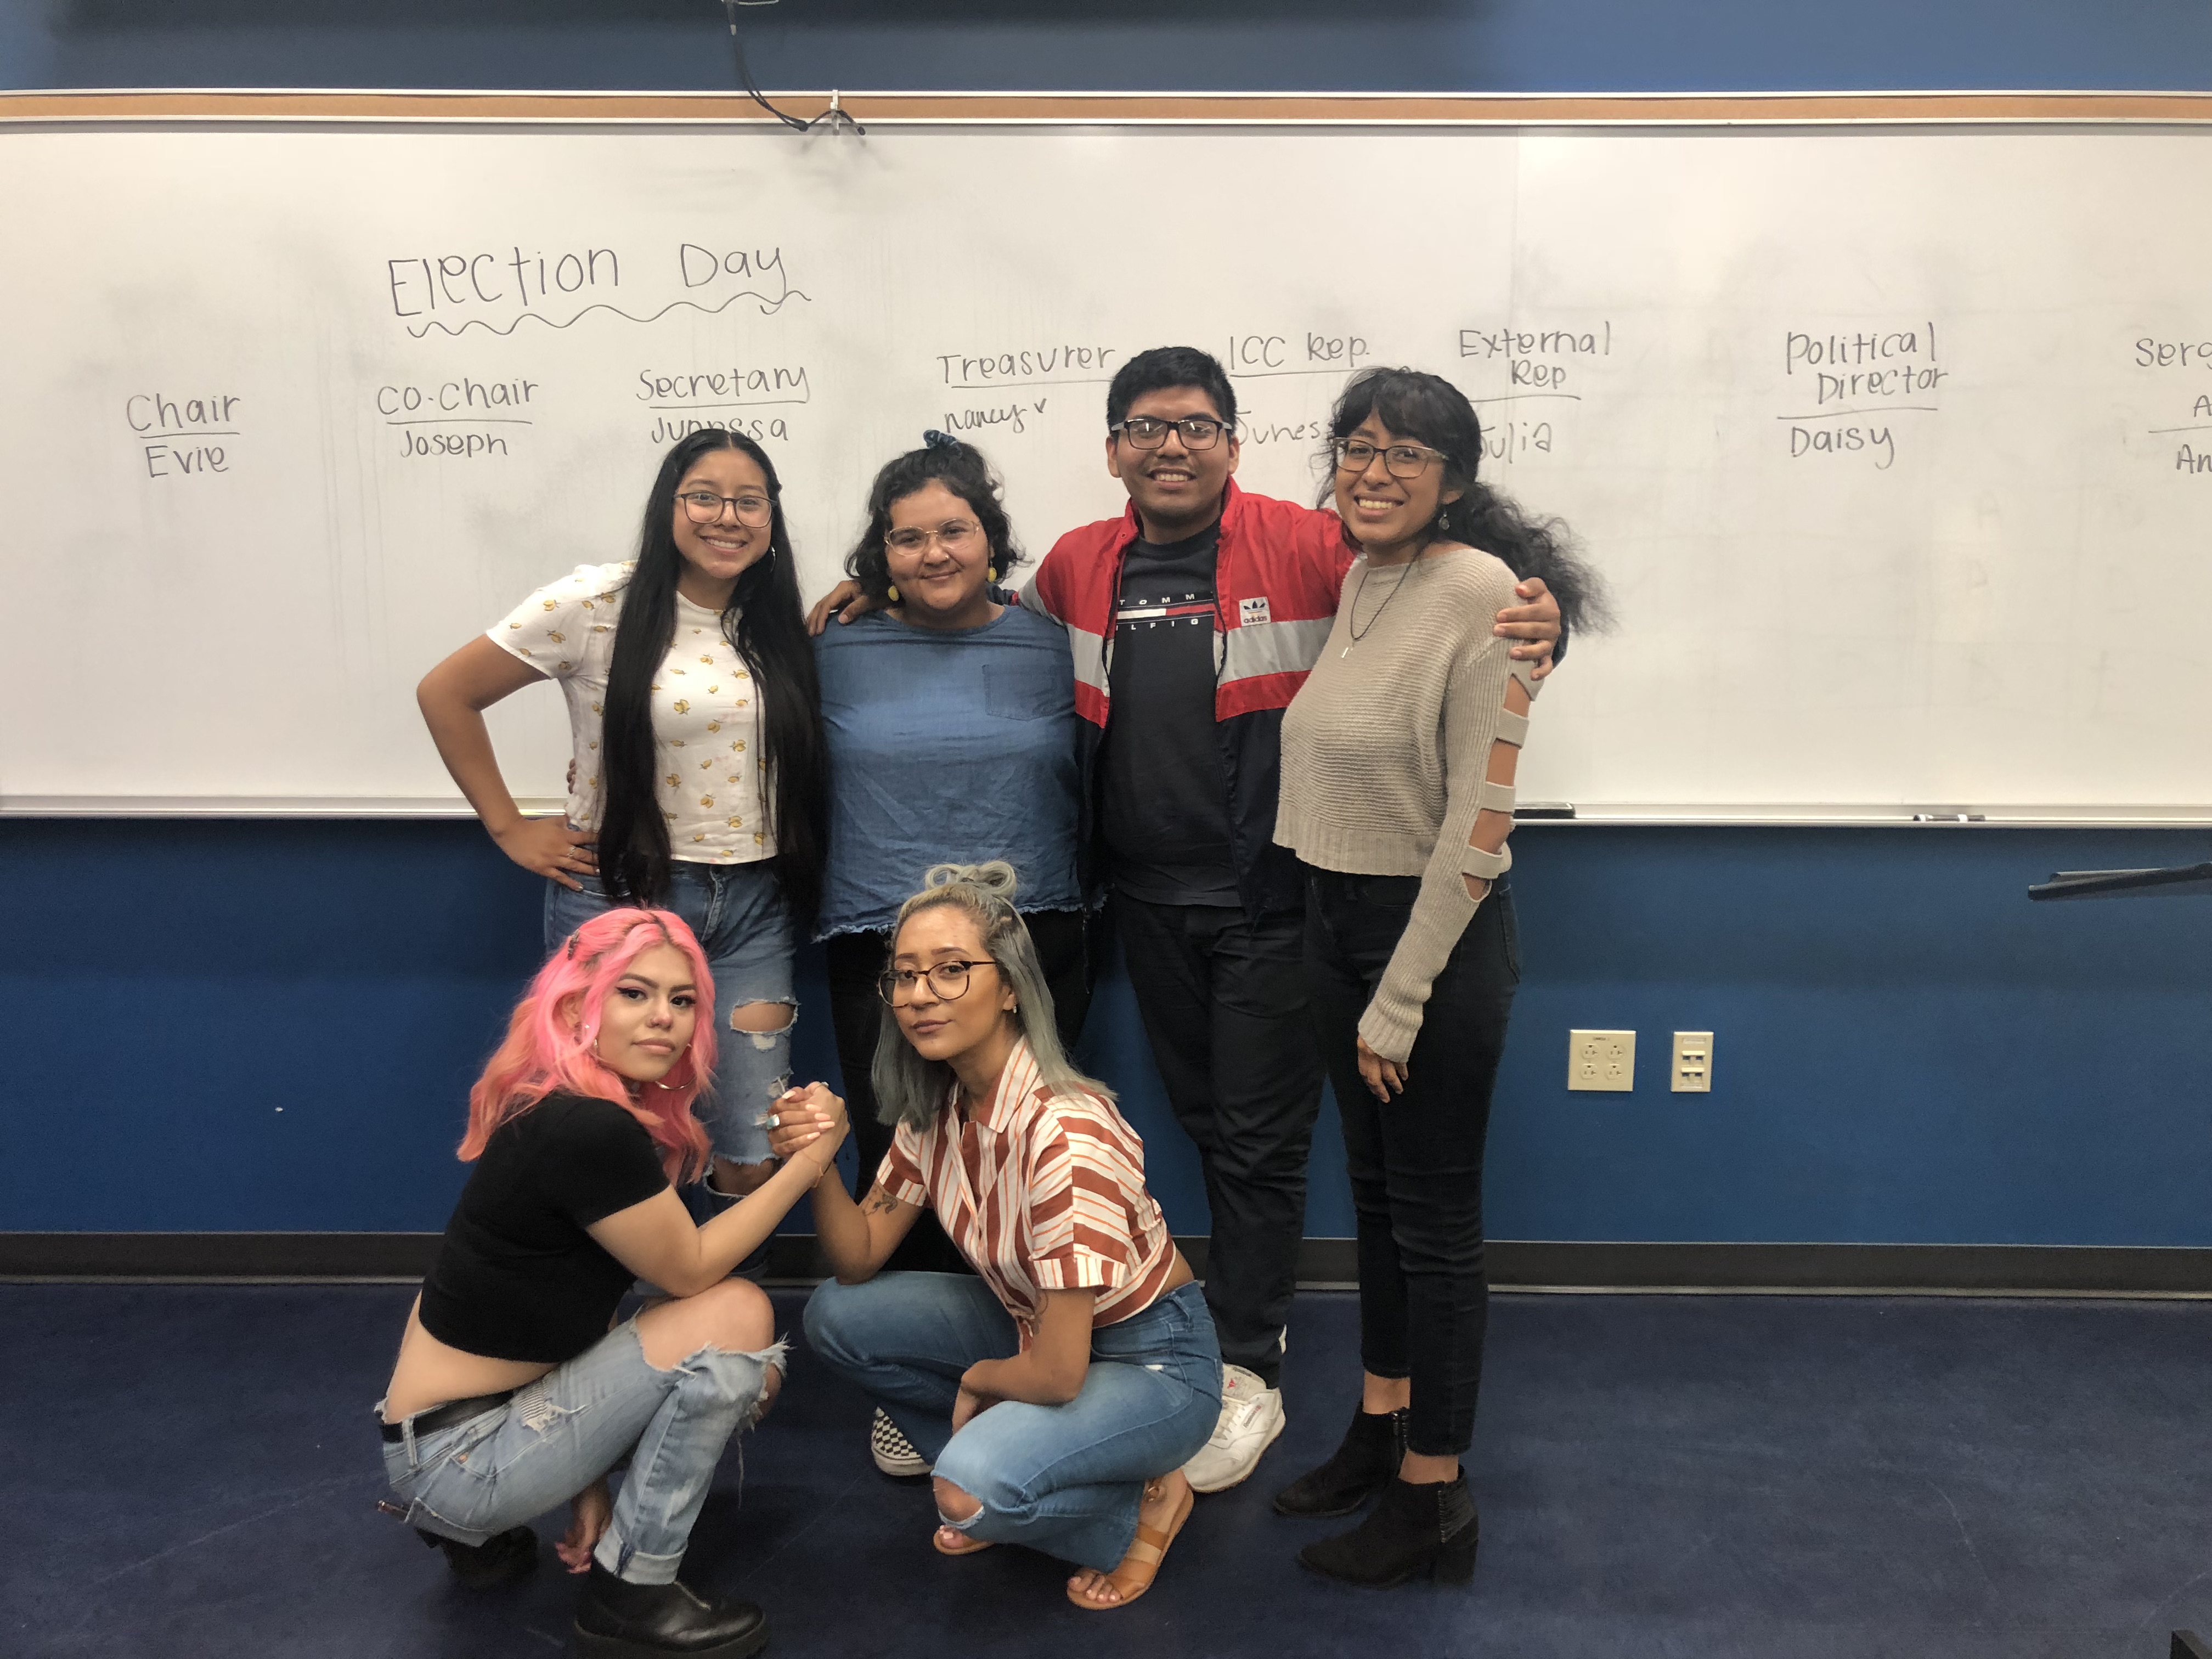 MEChA held club elections on May 14, 2019. Standing (from left to right): Nancy Morales, Daisy Zavala, Joseph Atemoa, and Junessa Reyes. Kneeling (from left to right): Ana Juarez and Evie Rivera. (Photo courtesy of Nancy Morales)